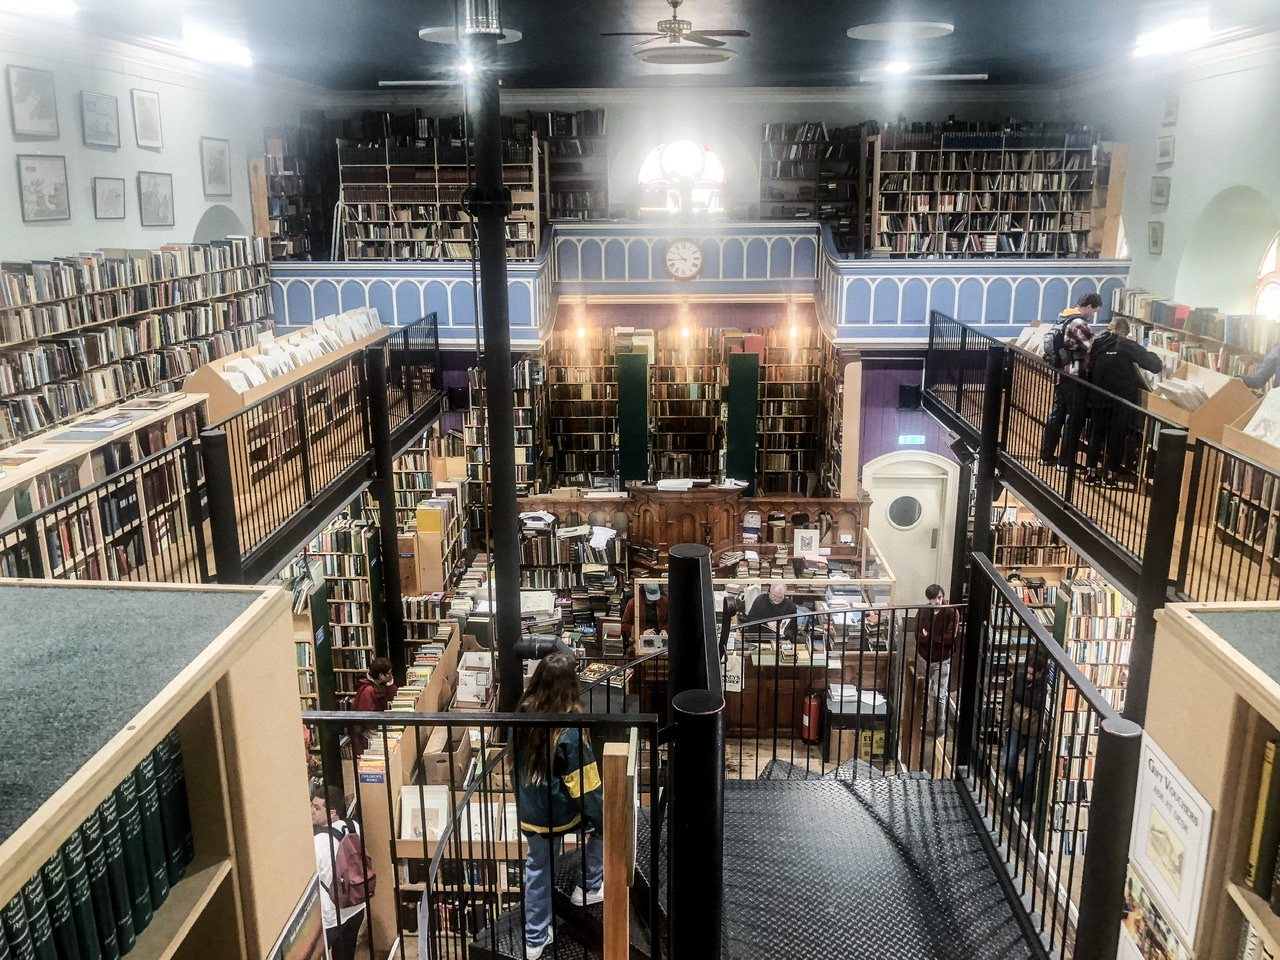 Interior of old bookshop inside a repurposed church. The second floor is formed of balconies leaving the ground floor and log fire chimney visible in the centre. Two people browsing upstairs, two down, and a young woman is climbing up circular metal staircase in front centre.